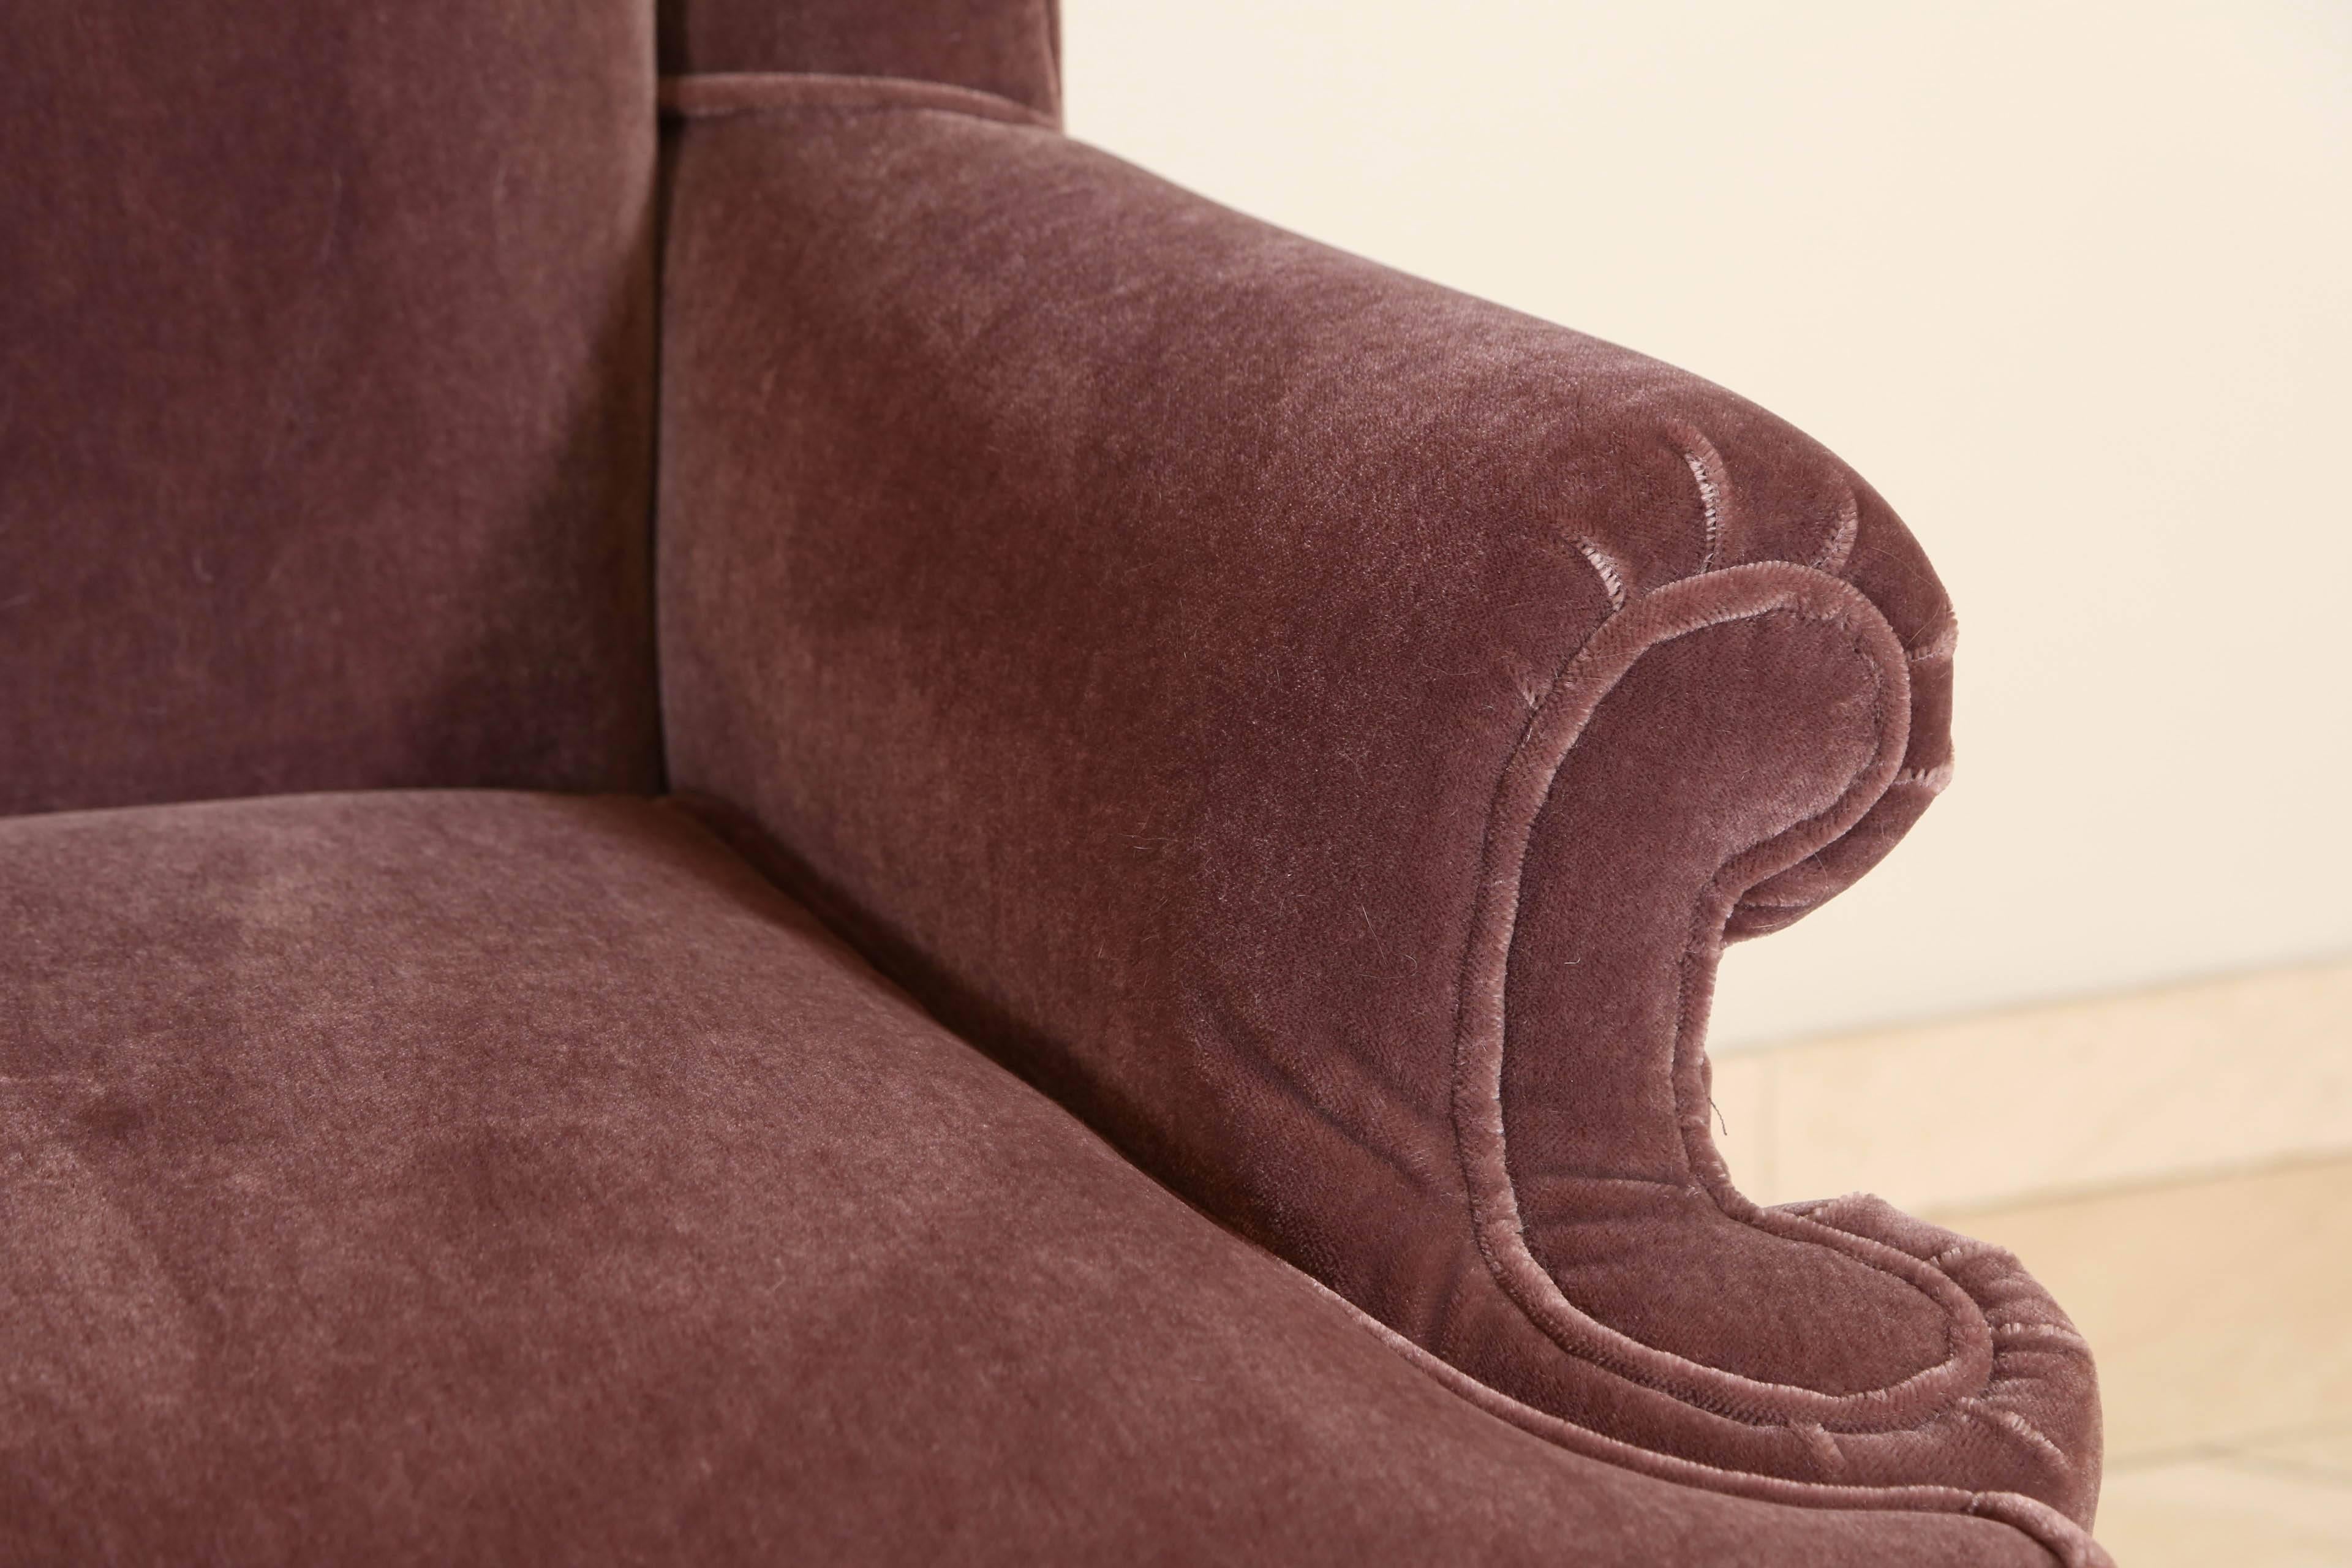 Large sculpted wingback French style mohair club lounge chair.
Newly reupholstered in plum color mohair velvet, excellent condition
A very comfortable armchair.